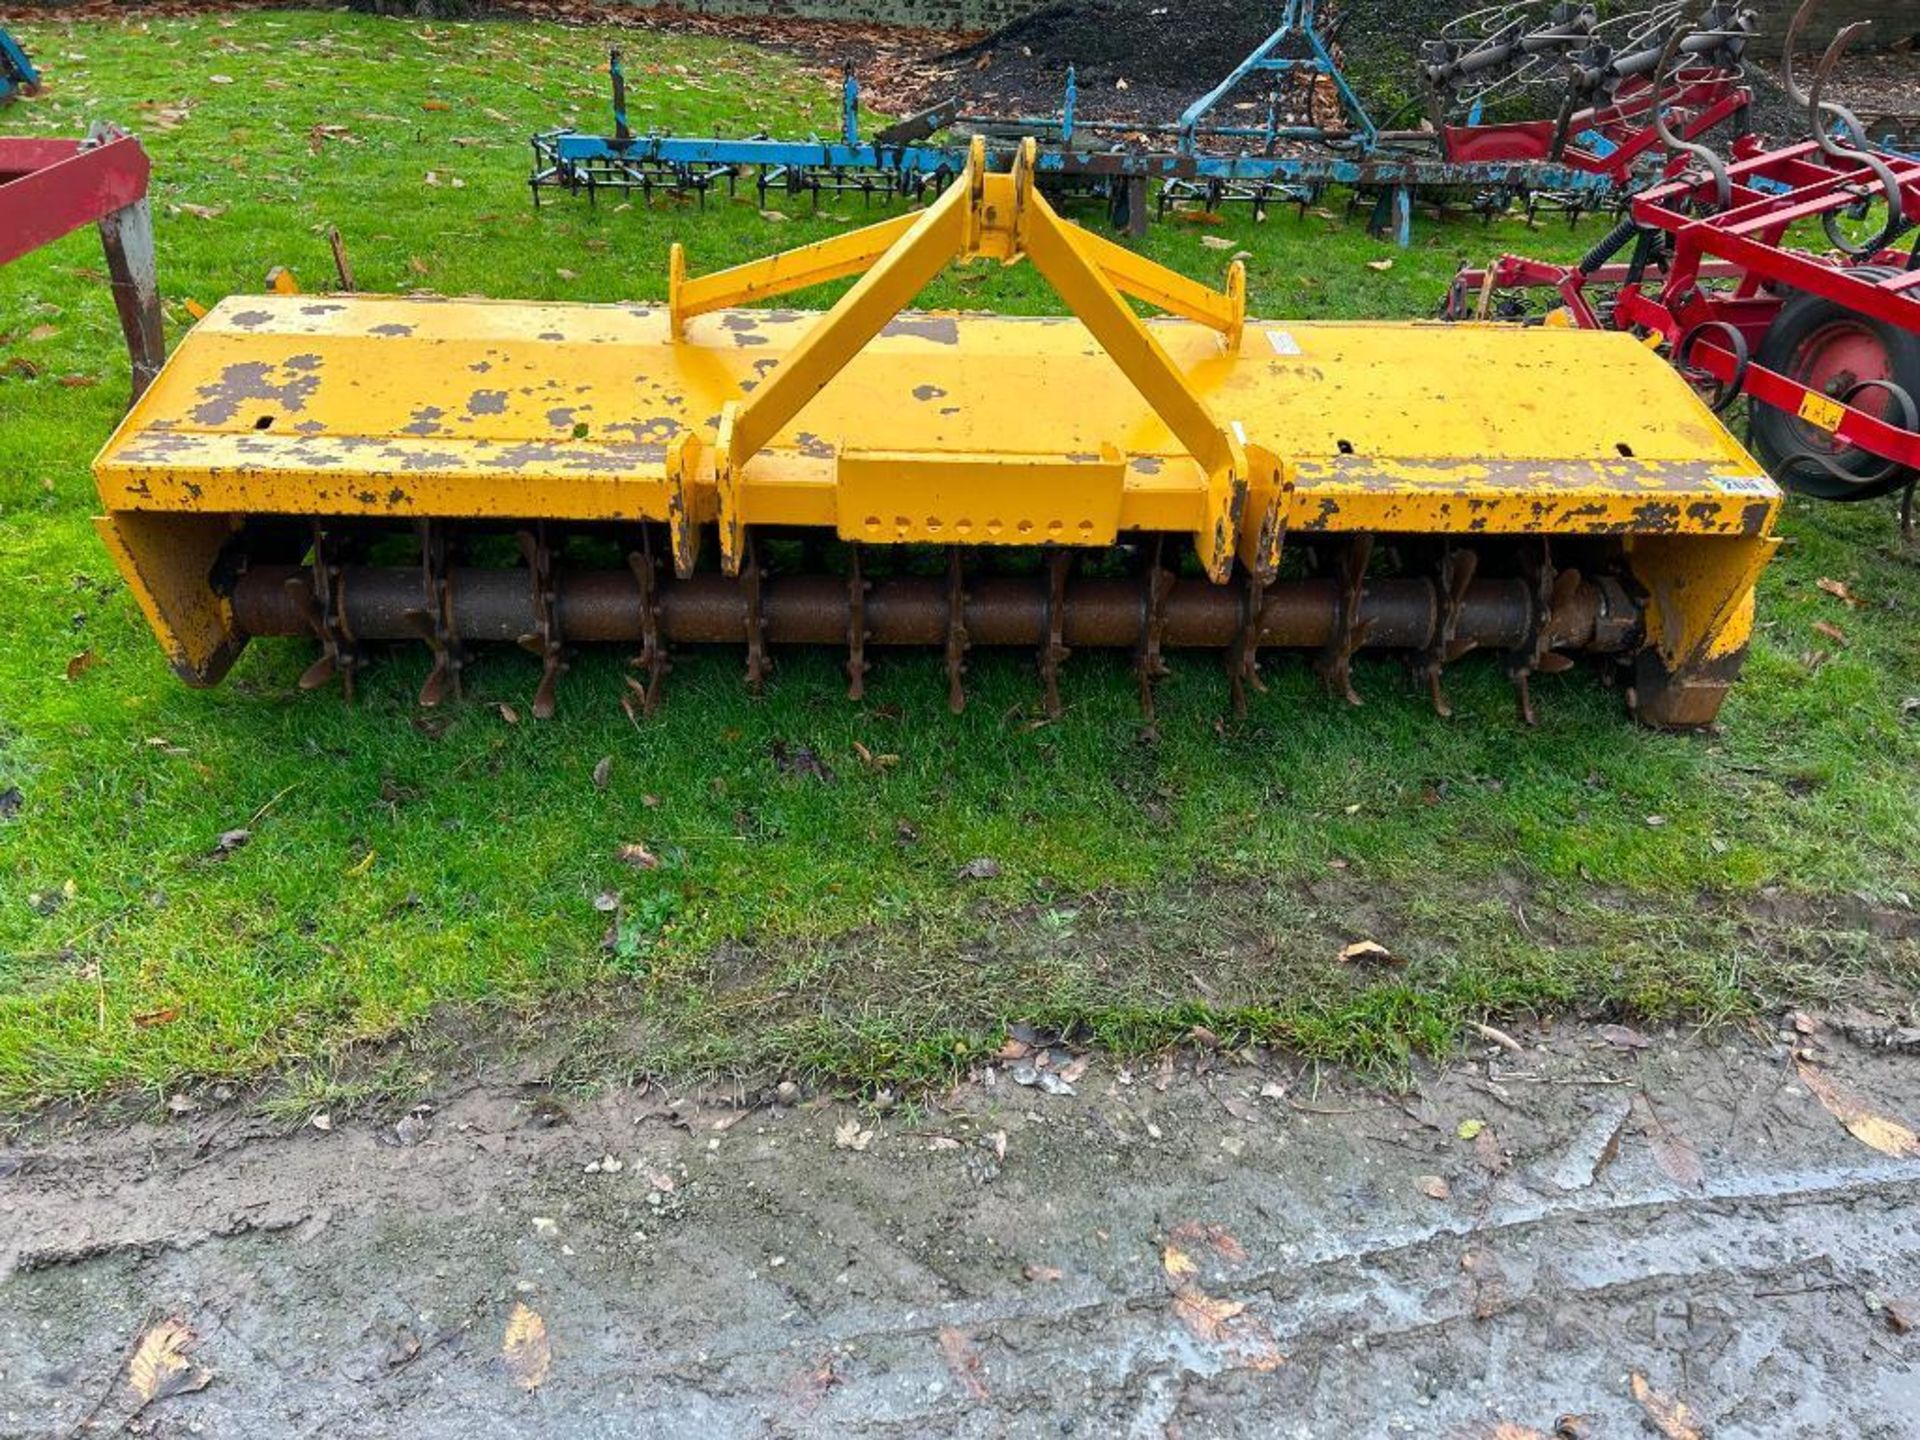 1984 Bomford 3m DynaDrive self drive rotary harrow. Serial No: 2519-T.  Manual in the office